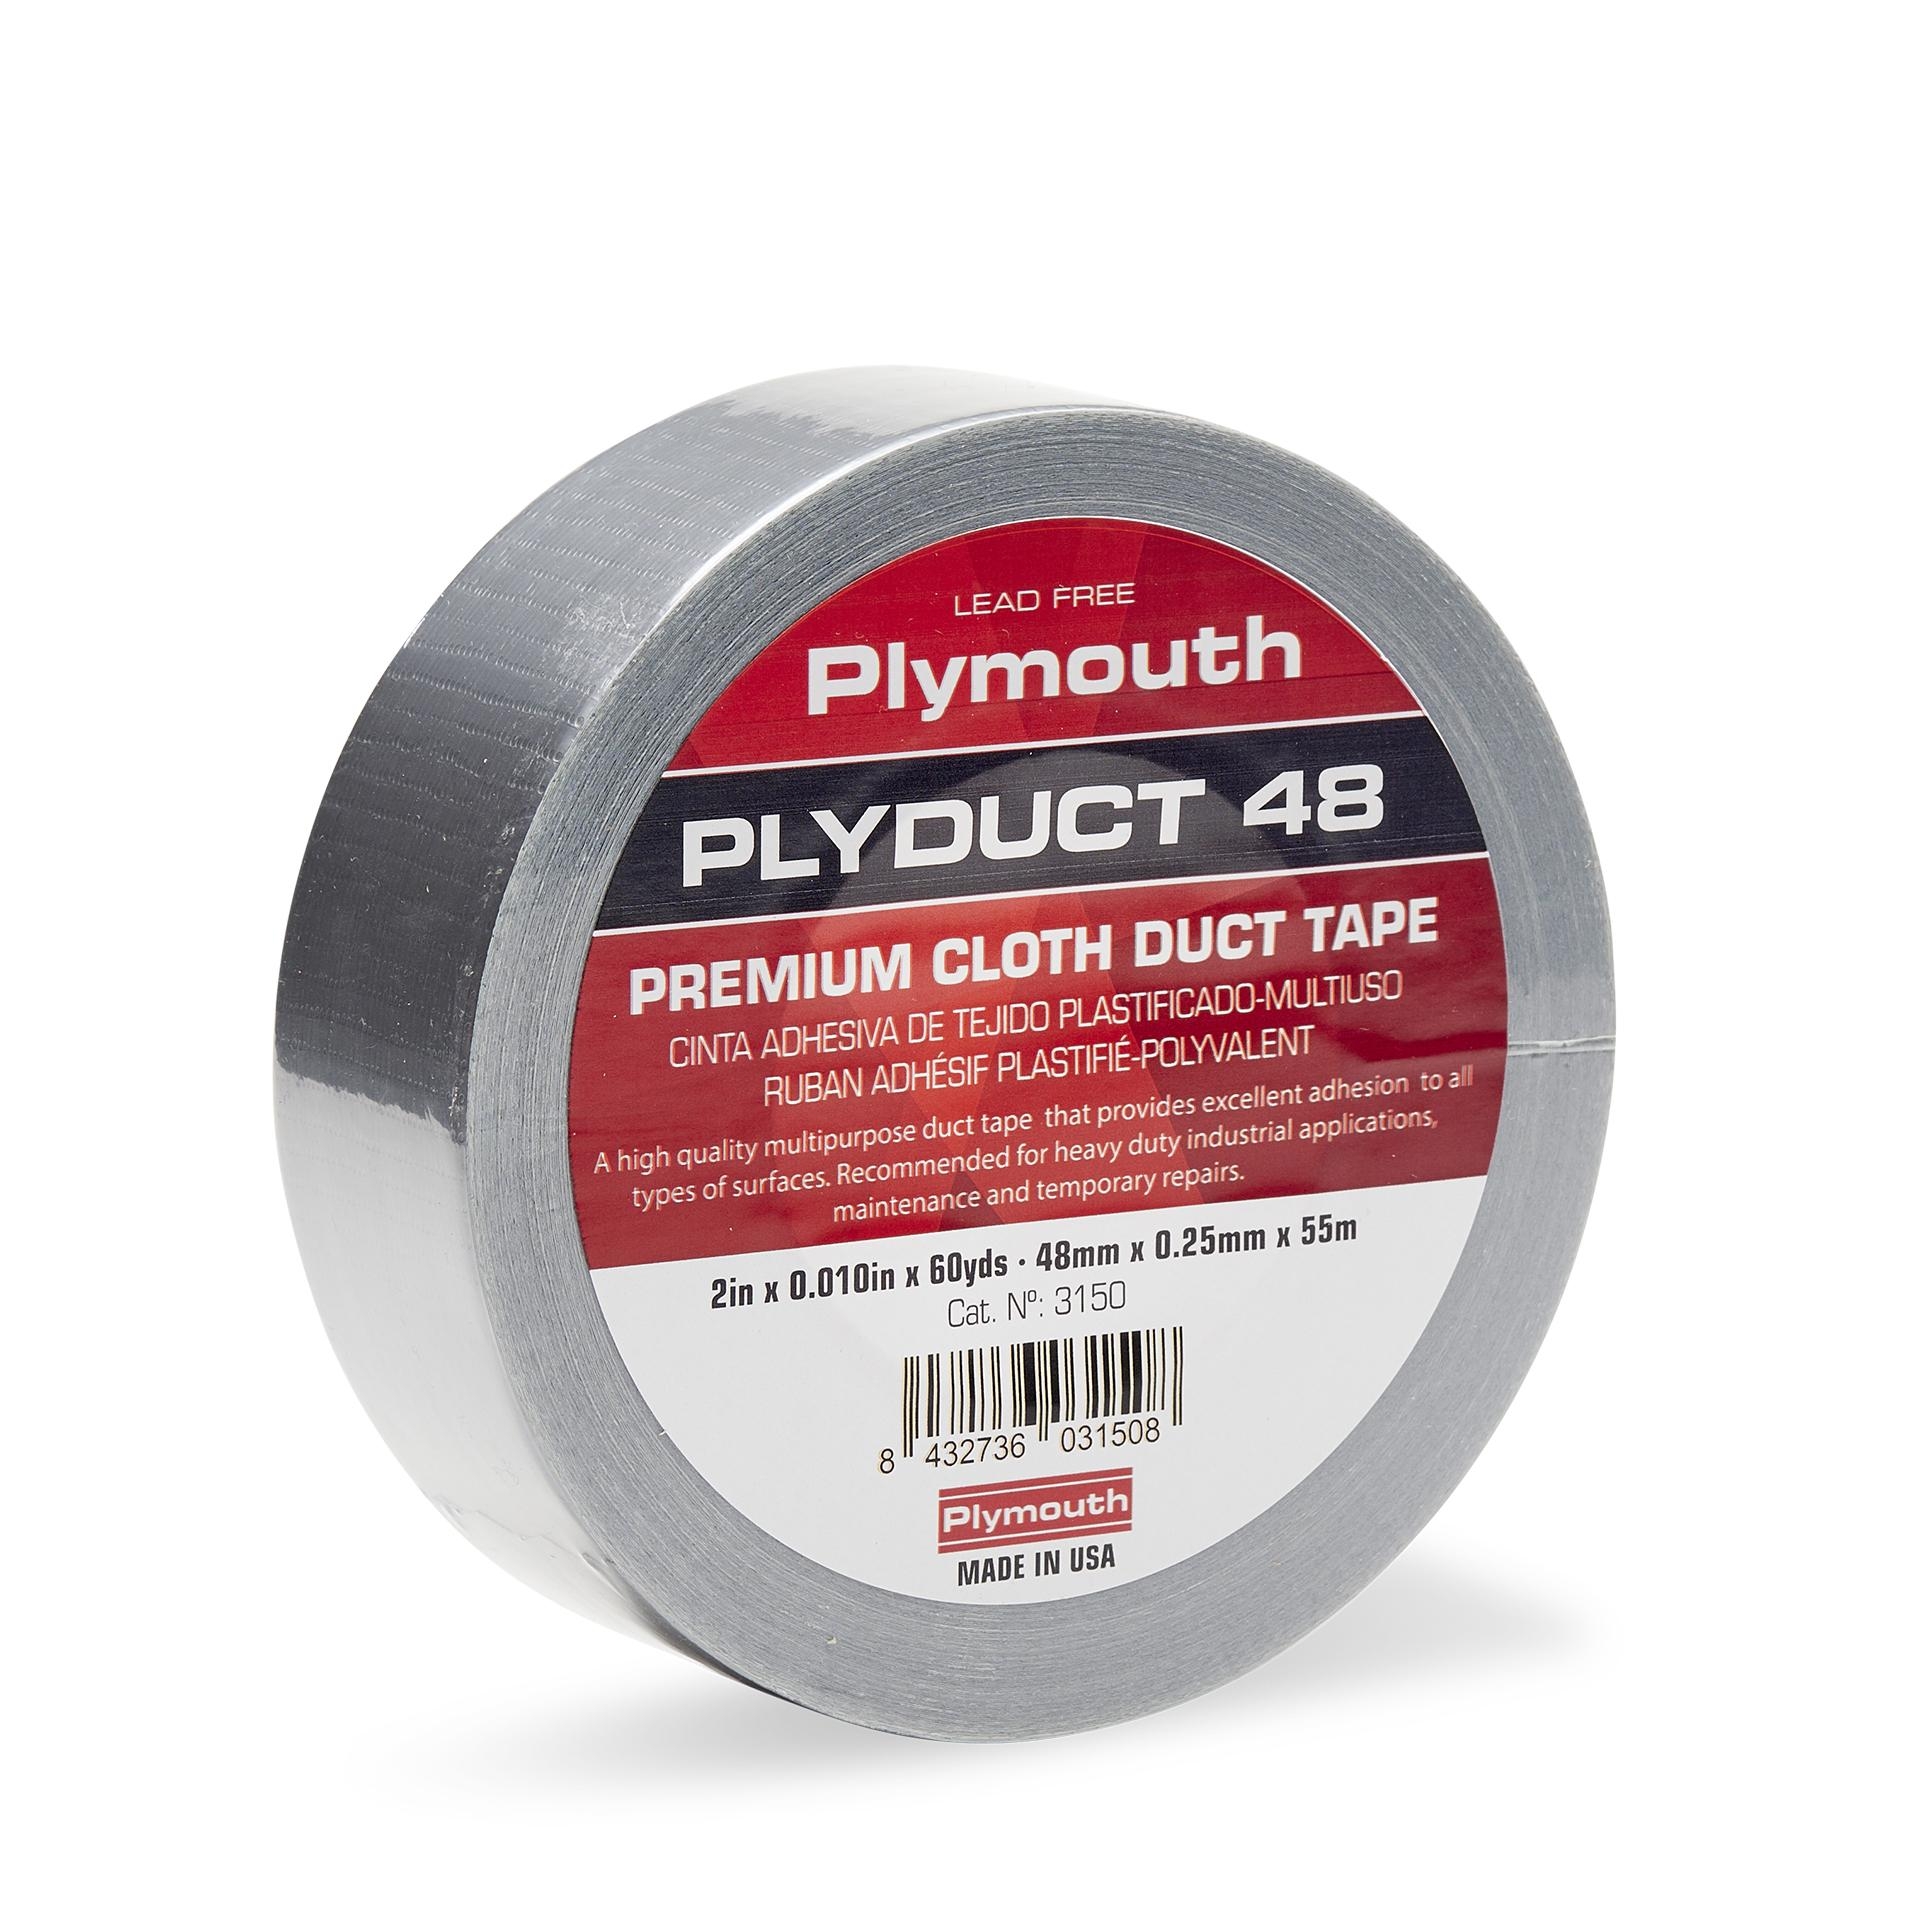 Plyduct 48